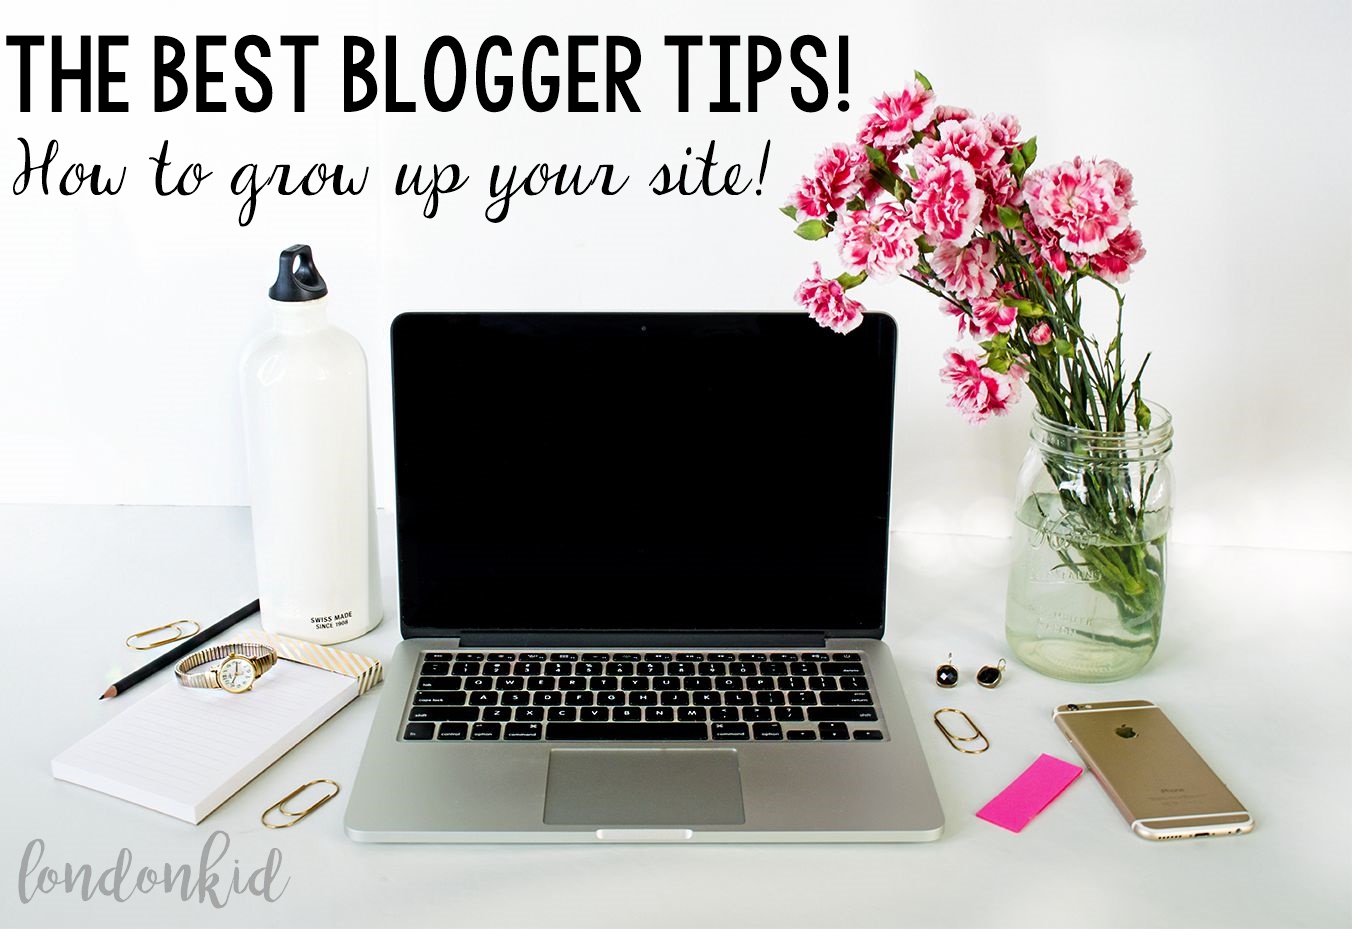 The best blogger tips! -. How to grow up your site!.